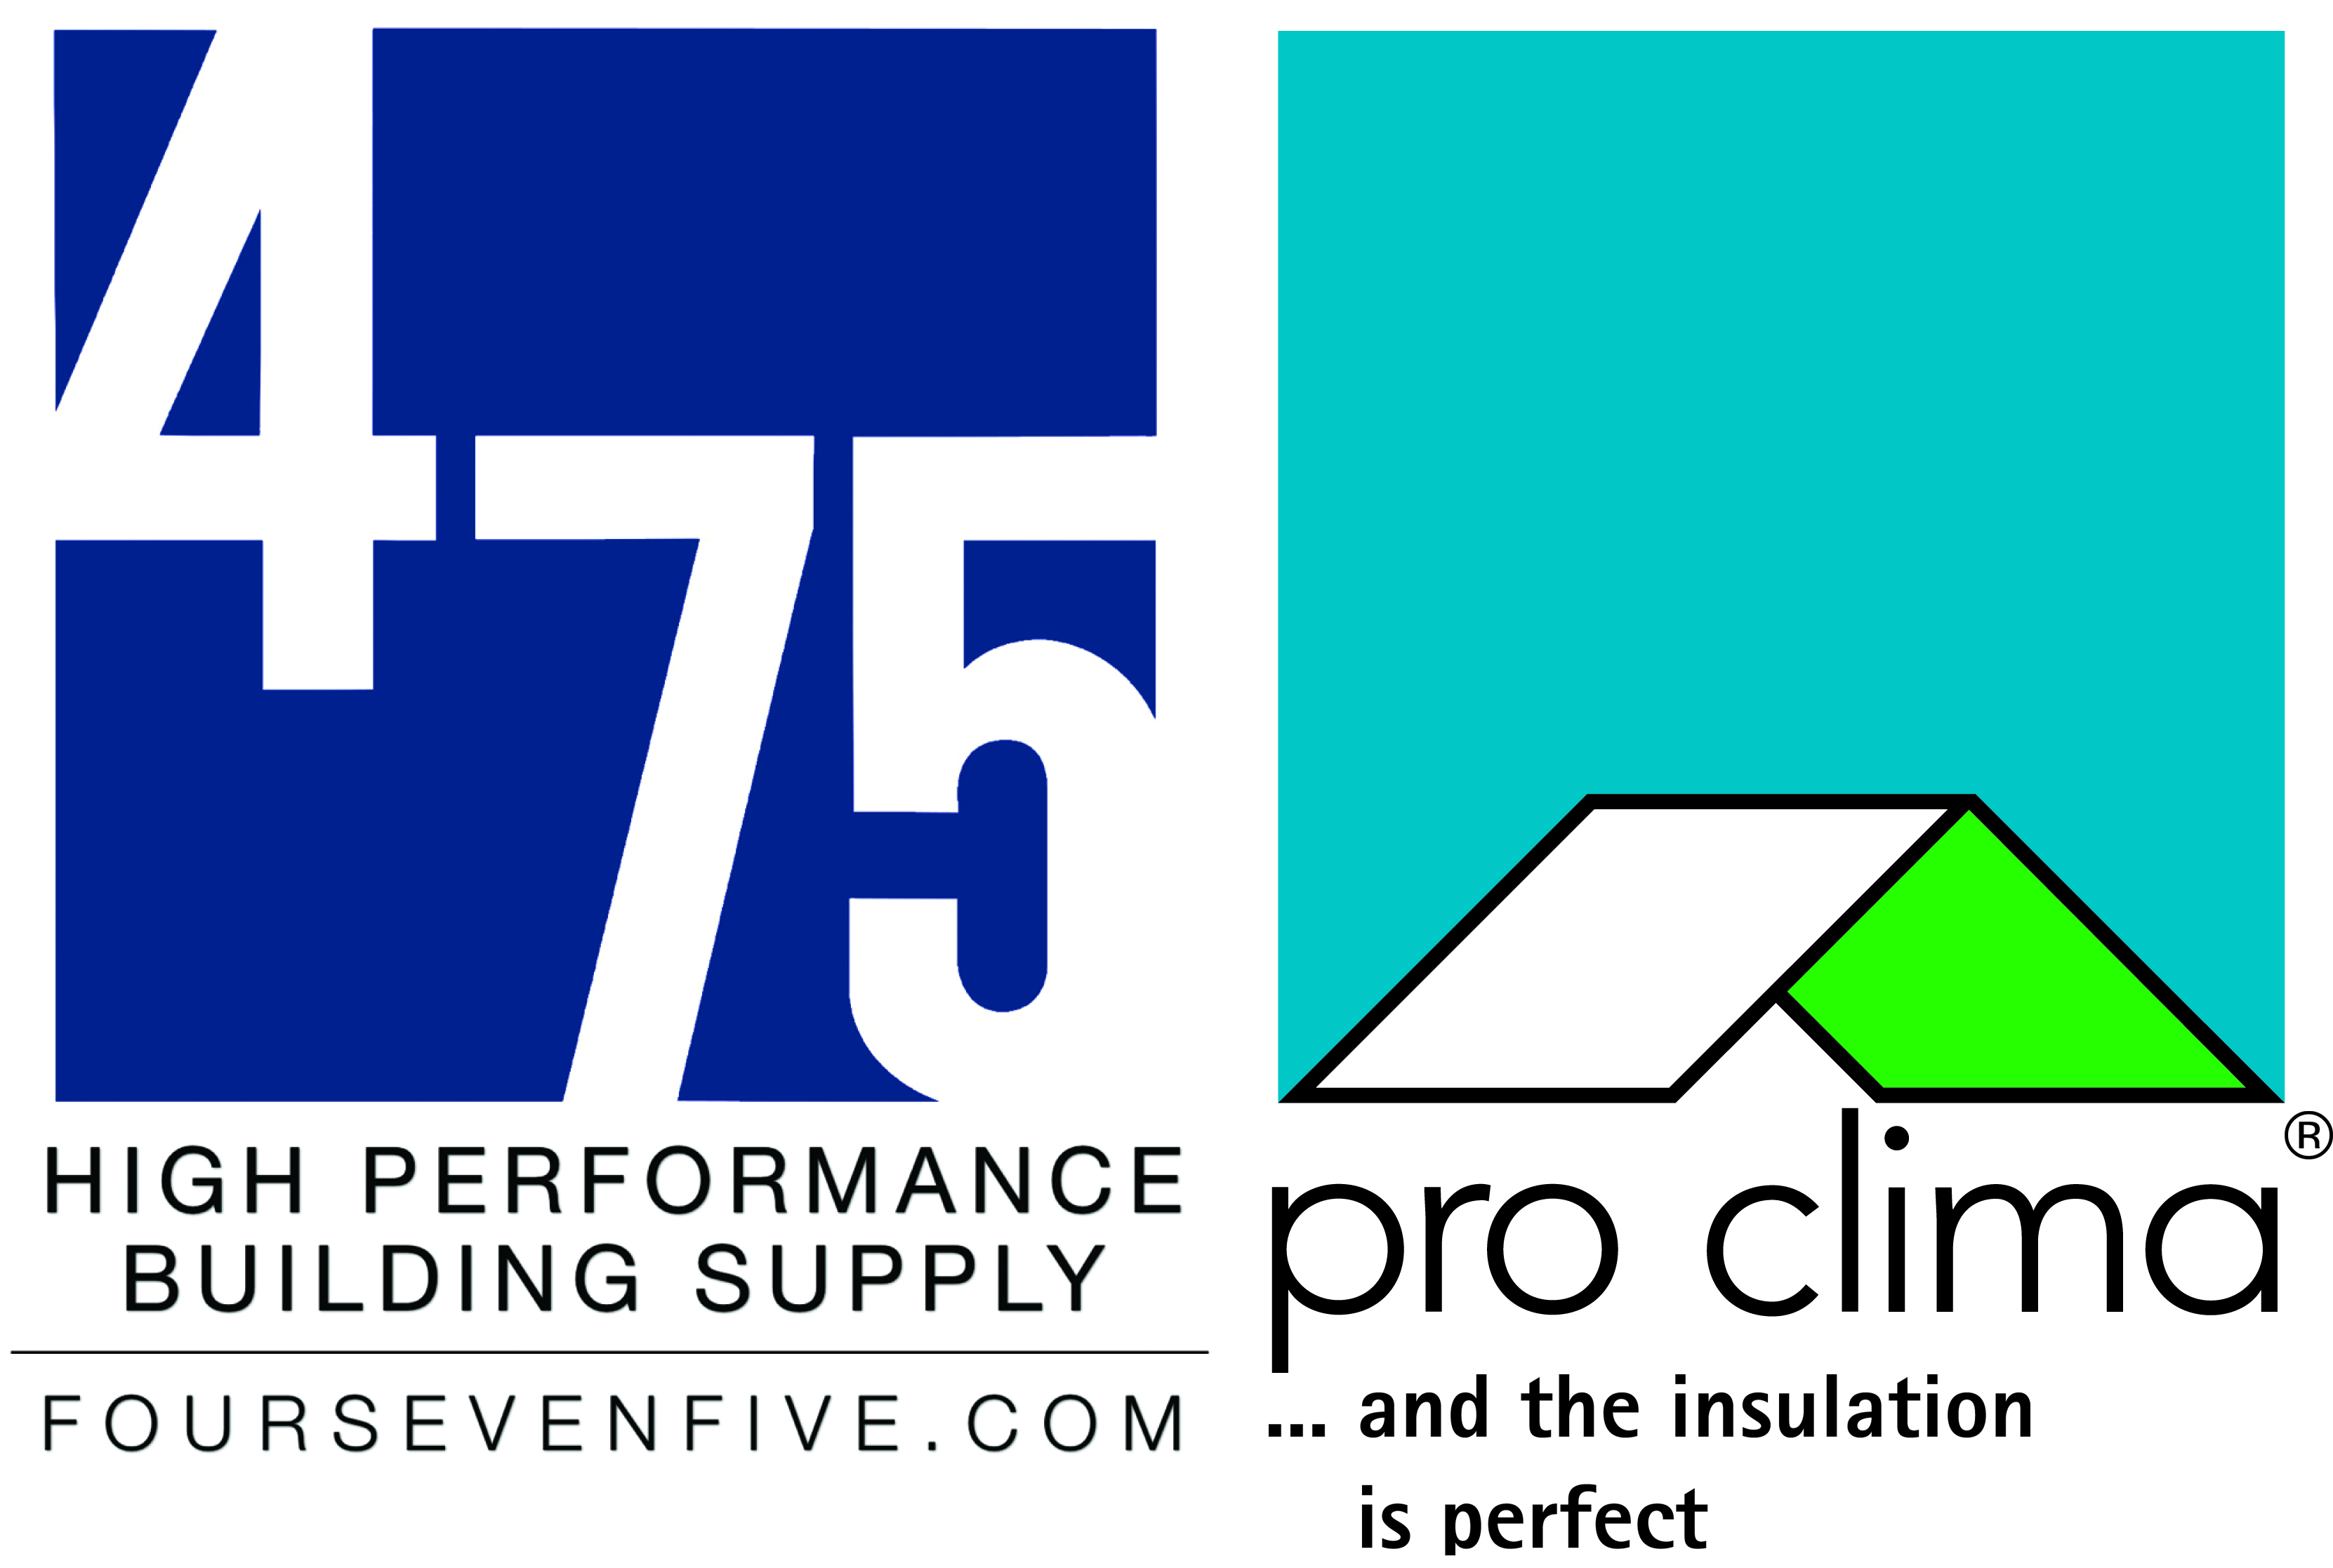 475 High Performance Building Supply is the North American distributor of Pro Clima products.